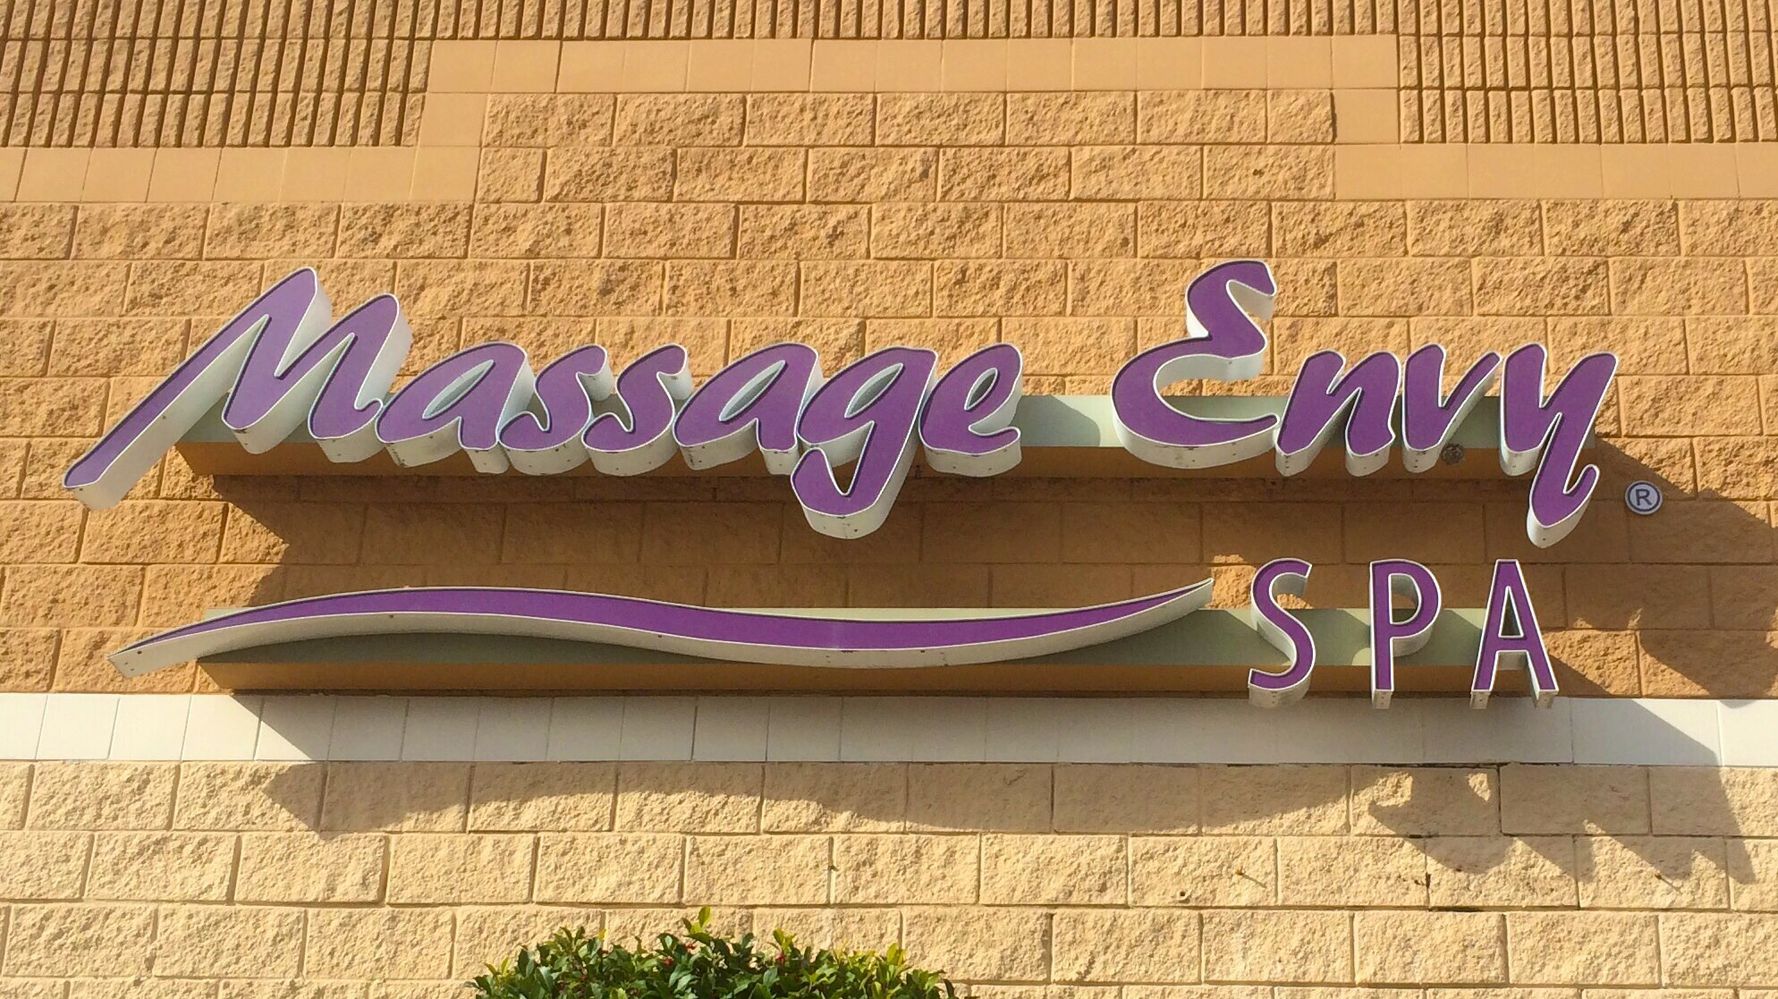 The Surreal Reason This Woman Can't Sue Massage Envy Over Her Sexual Assault